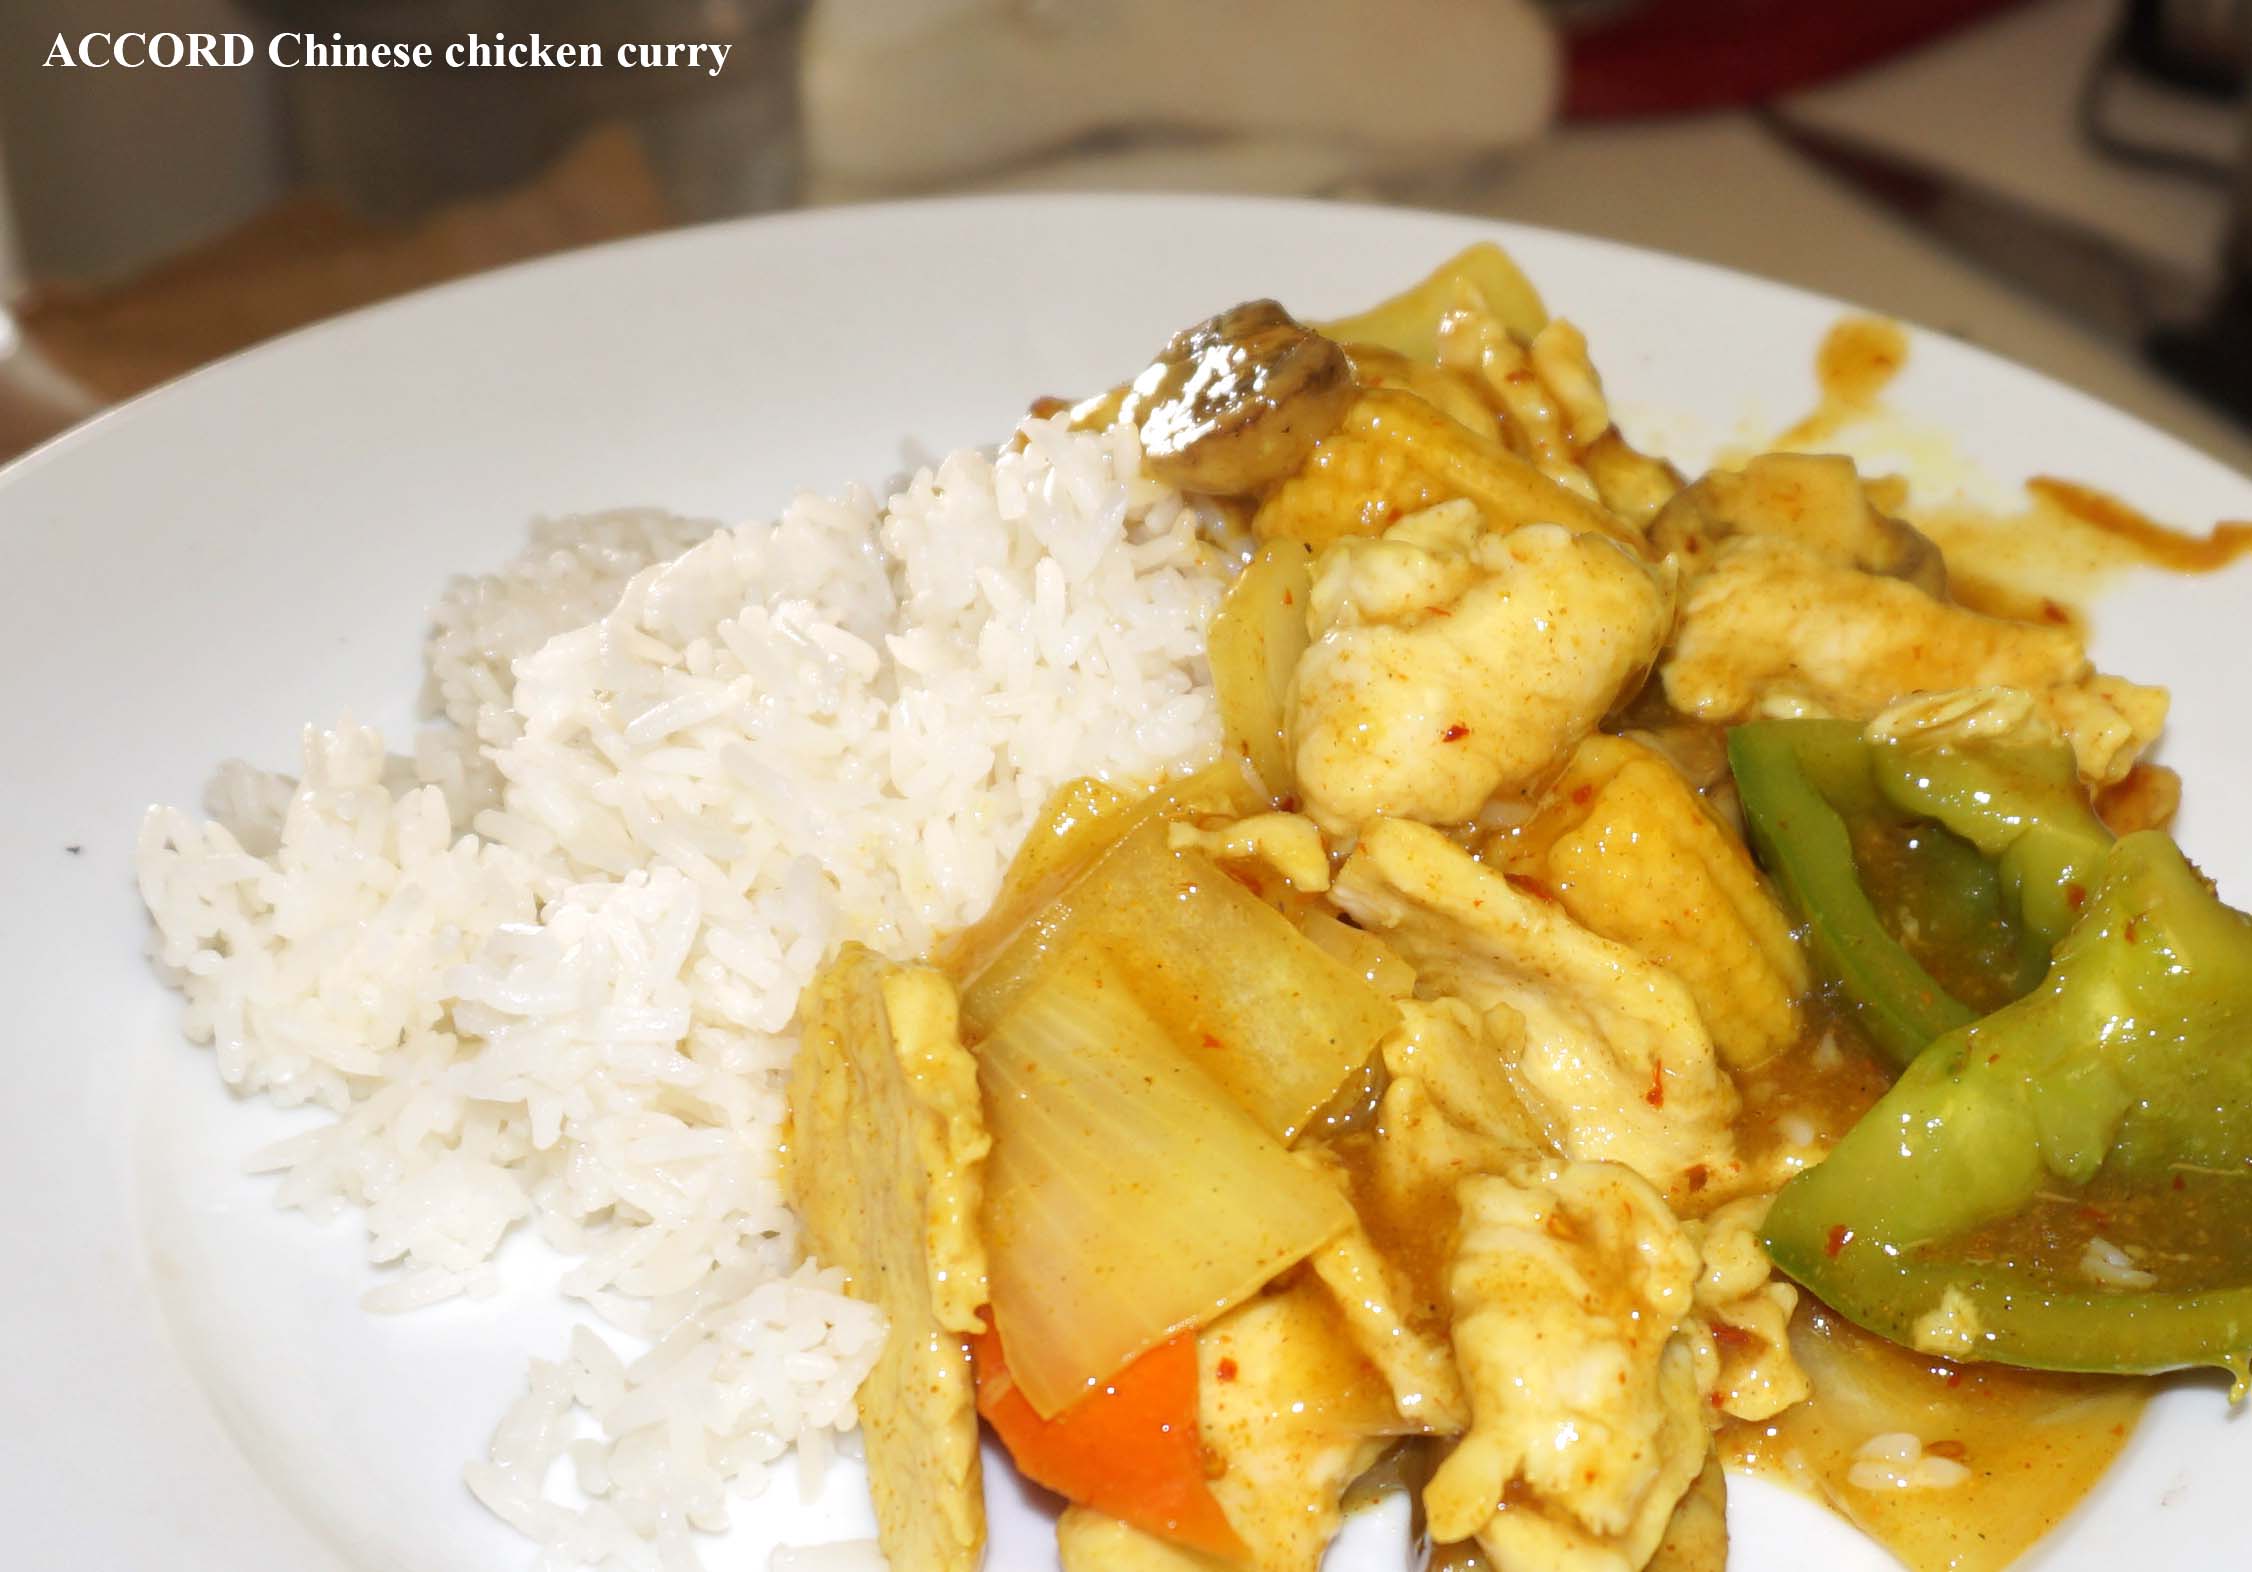 ACCORD Chinese chicken curry